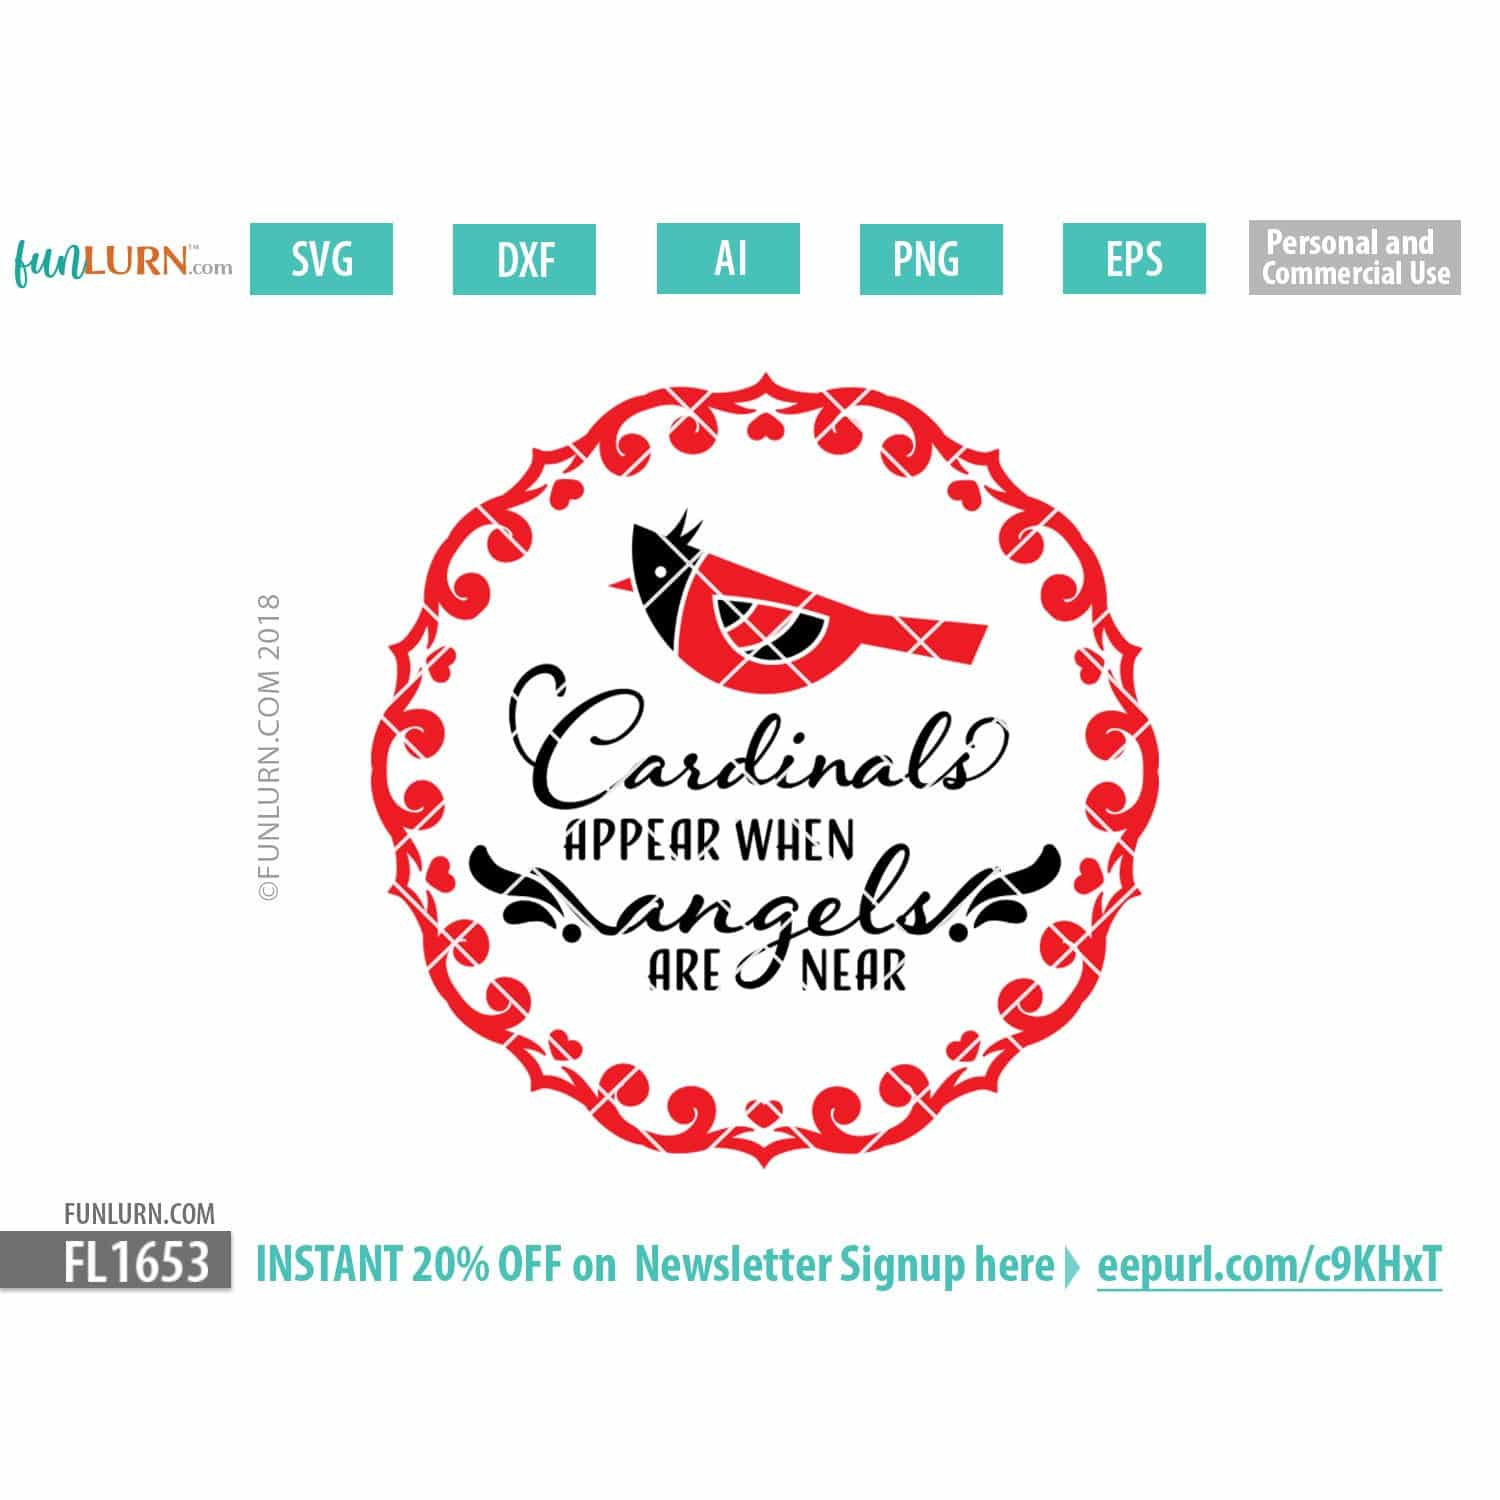 Download Cardinals Appear When Angels Are Near Svg Cut File Funlurn